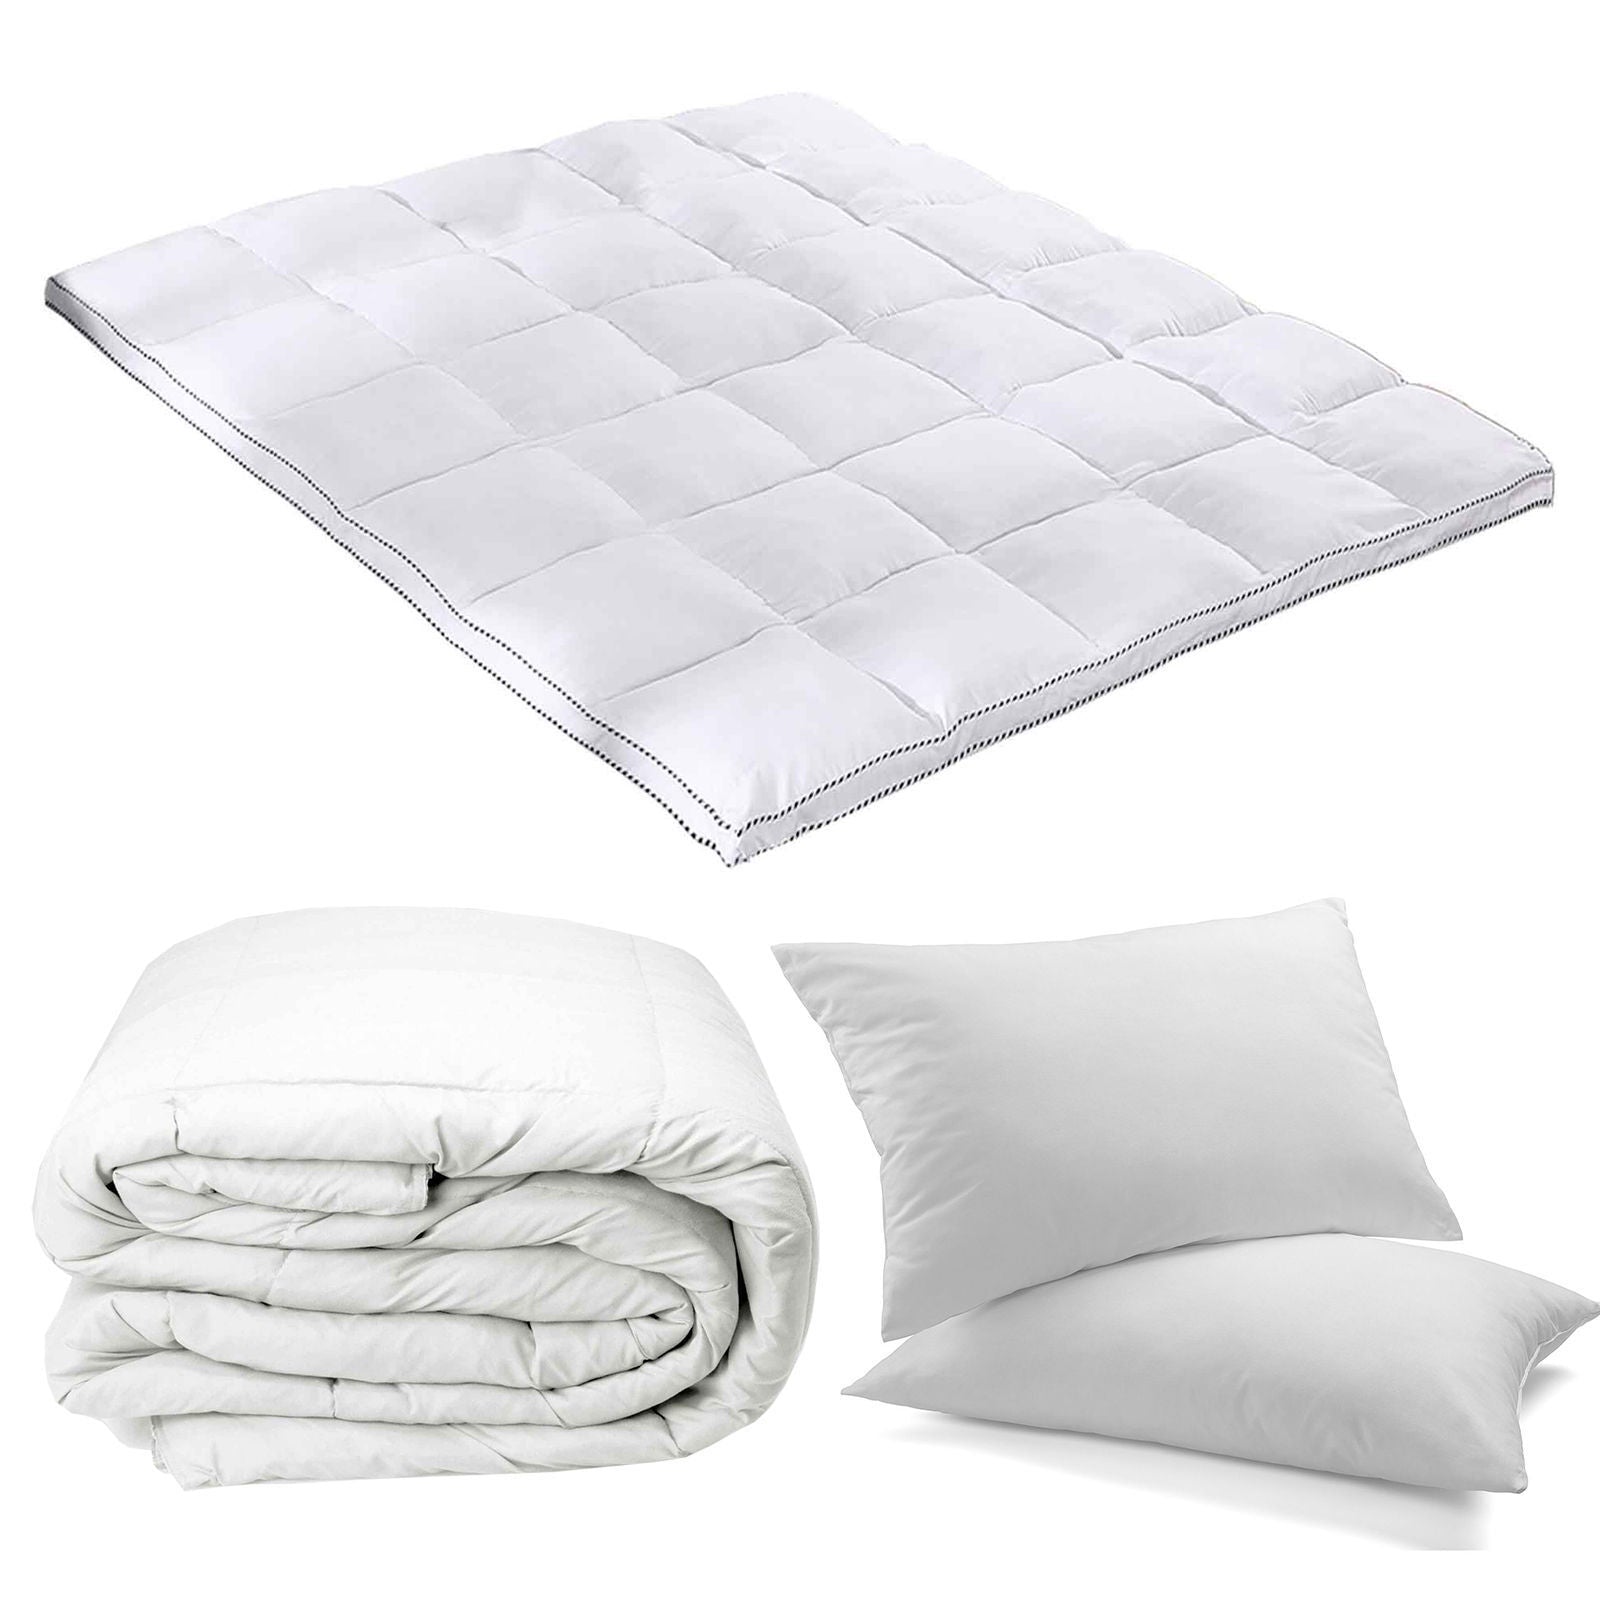 Royal Comfort Bedding Essentials Bed In Bag 1 x Quilt 1 x Topper 2 x Pillows Set-Bedding-PEROZ Accessories